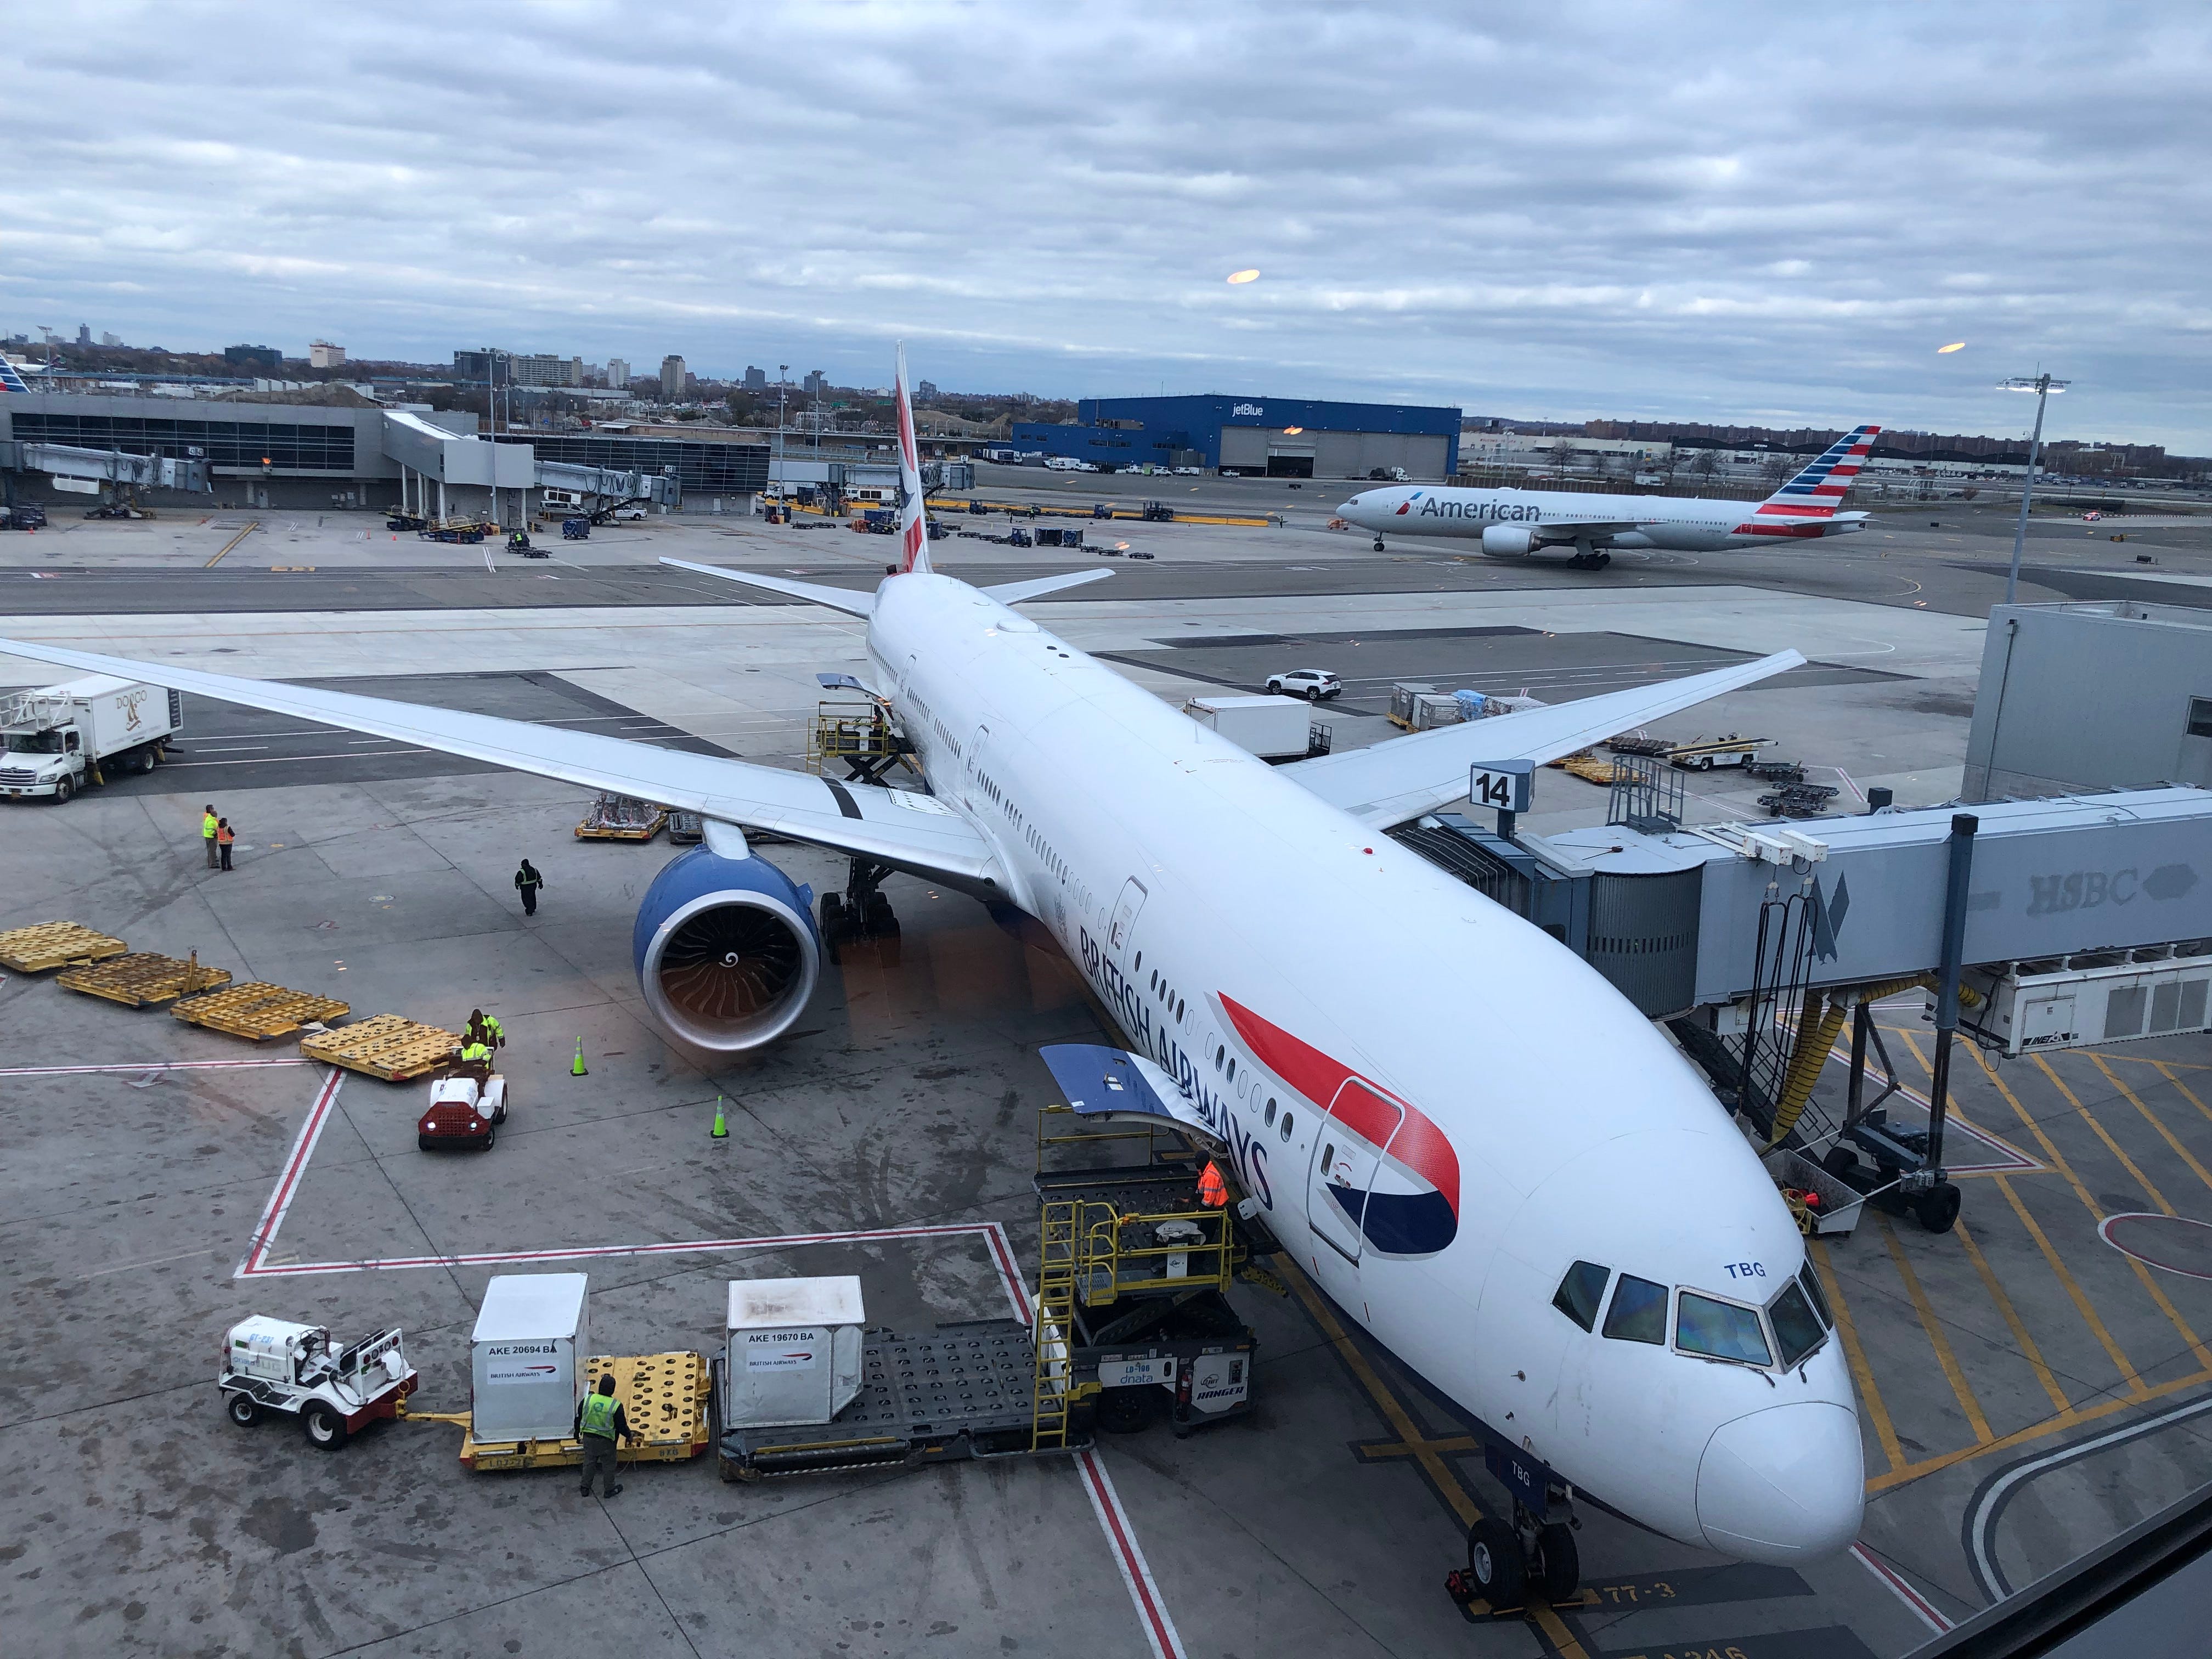 Hey neighbor: American Airlines and British Airways move in together at JFK Terminal 8